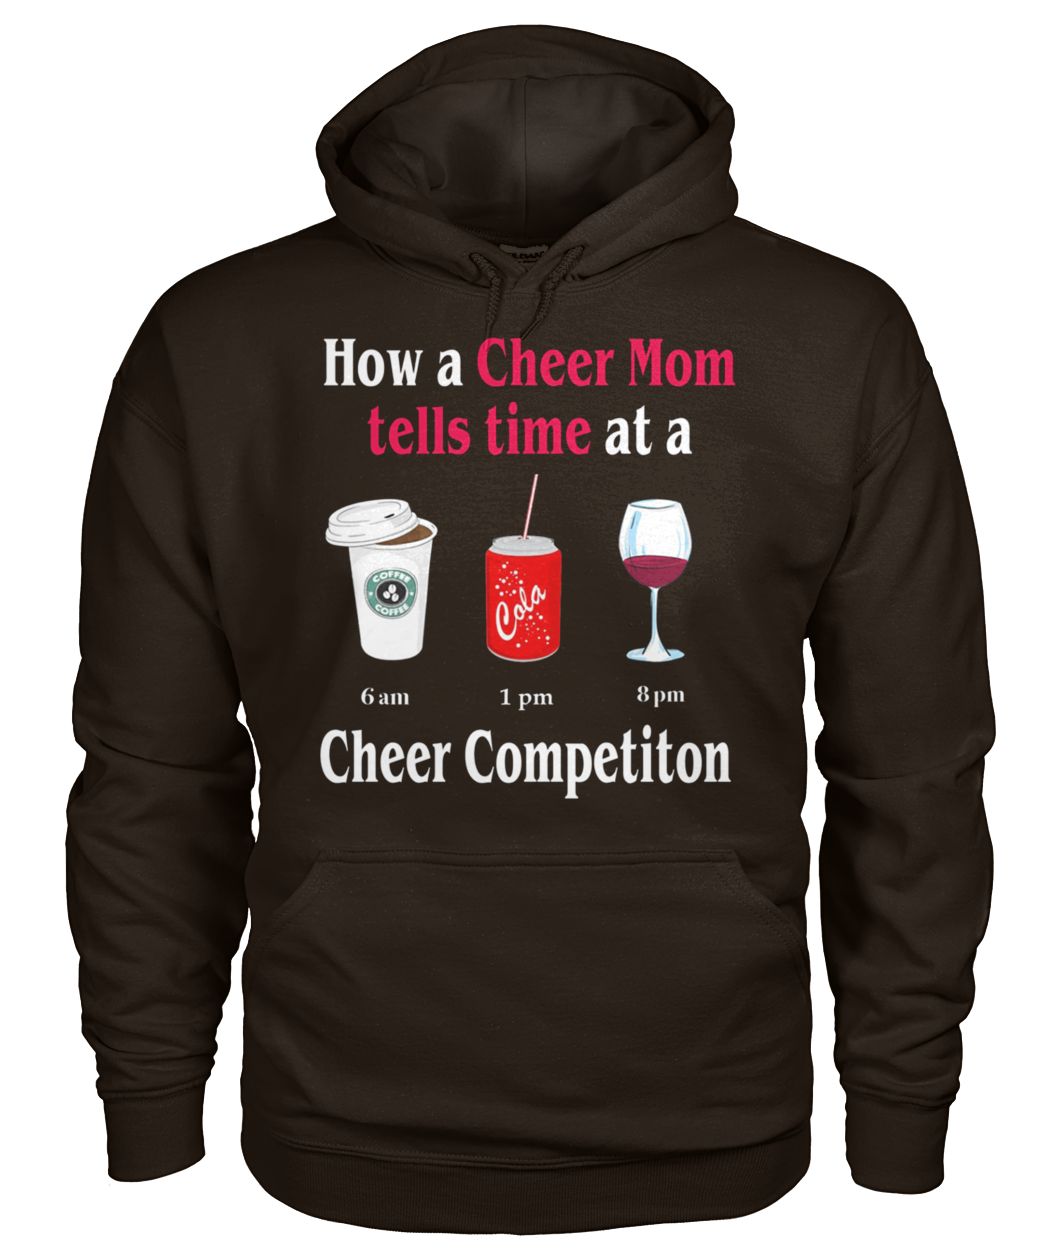 How a cheer mom tells time at a cheer competition gildan hoodie